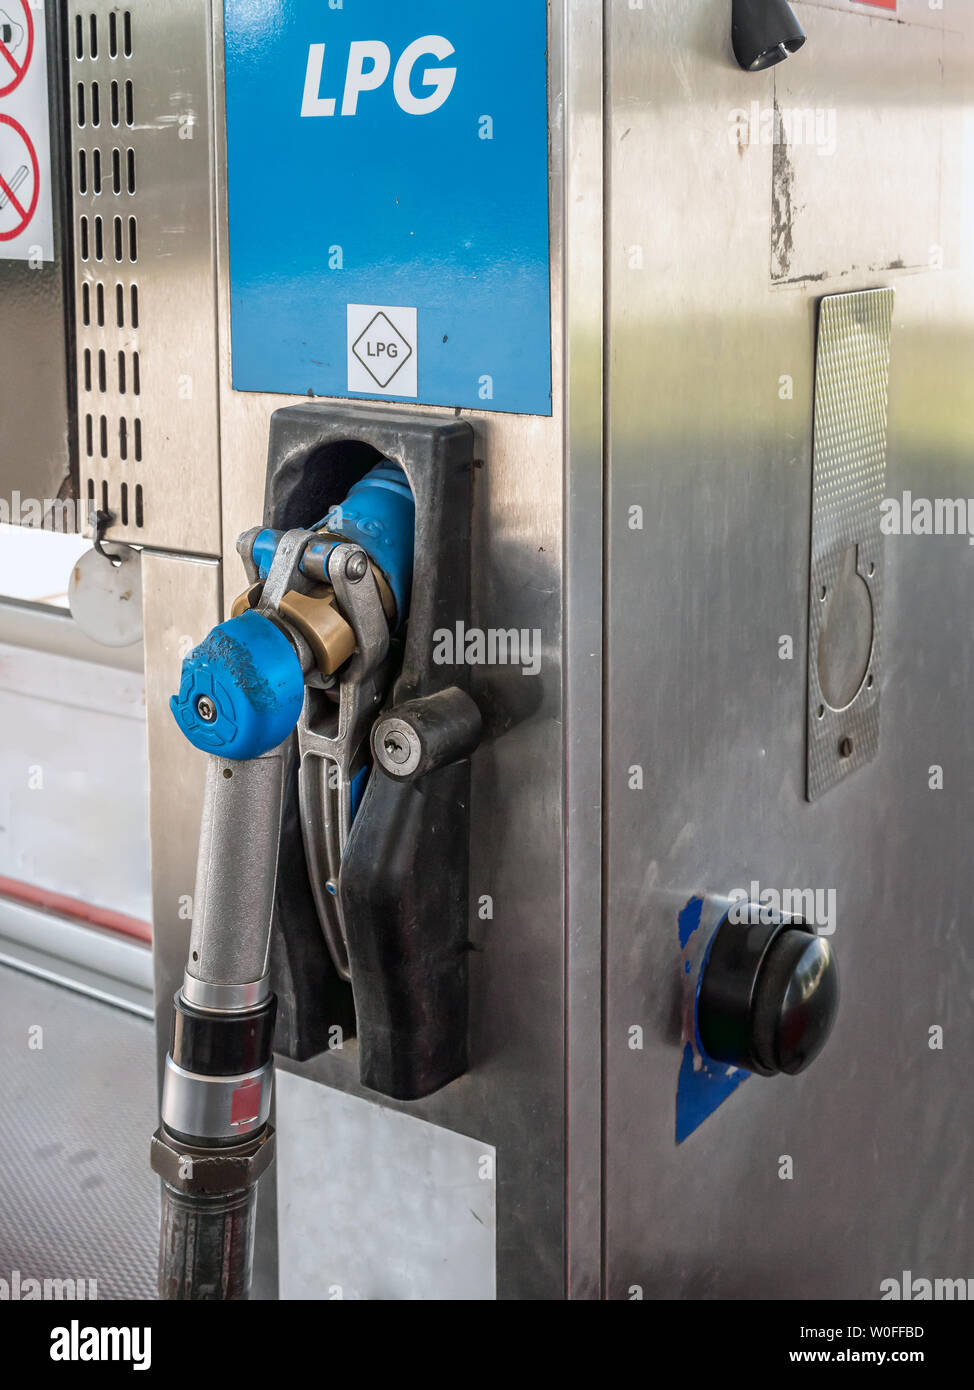 LPG pump station for filling liquefied gas for vehicles Stock Photo - Alamy